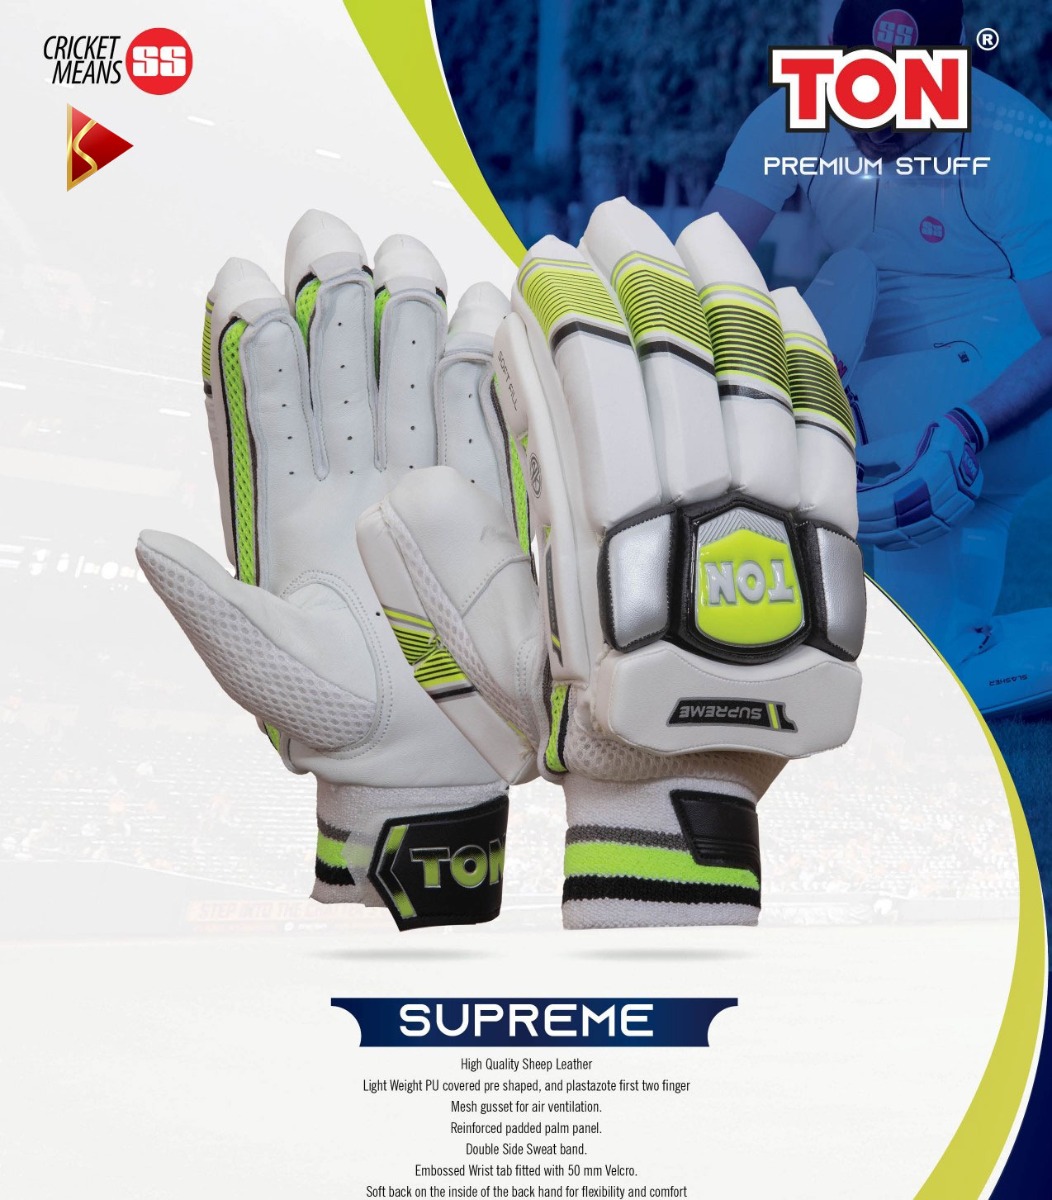 SS Ton Supreme Batting Gloves Features